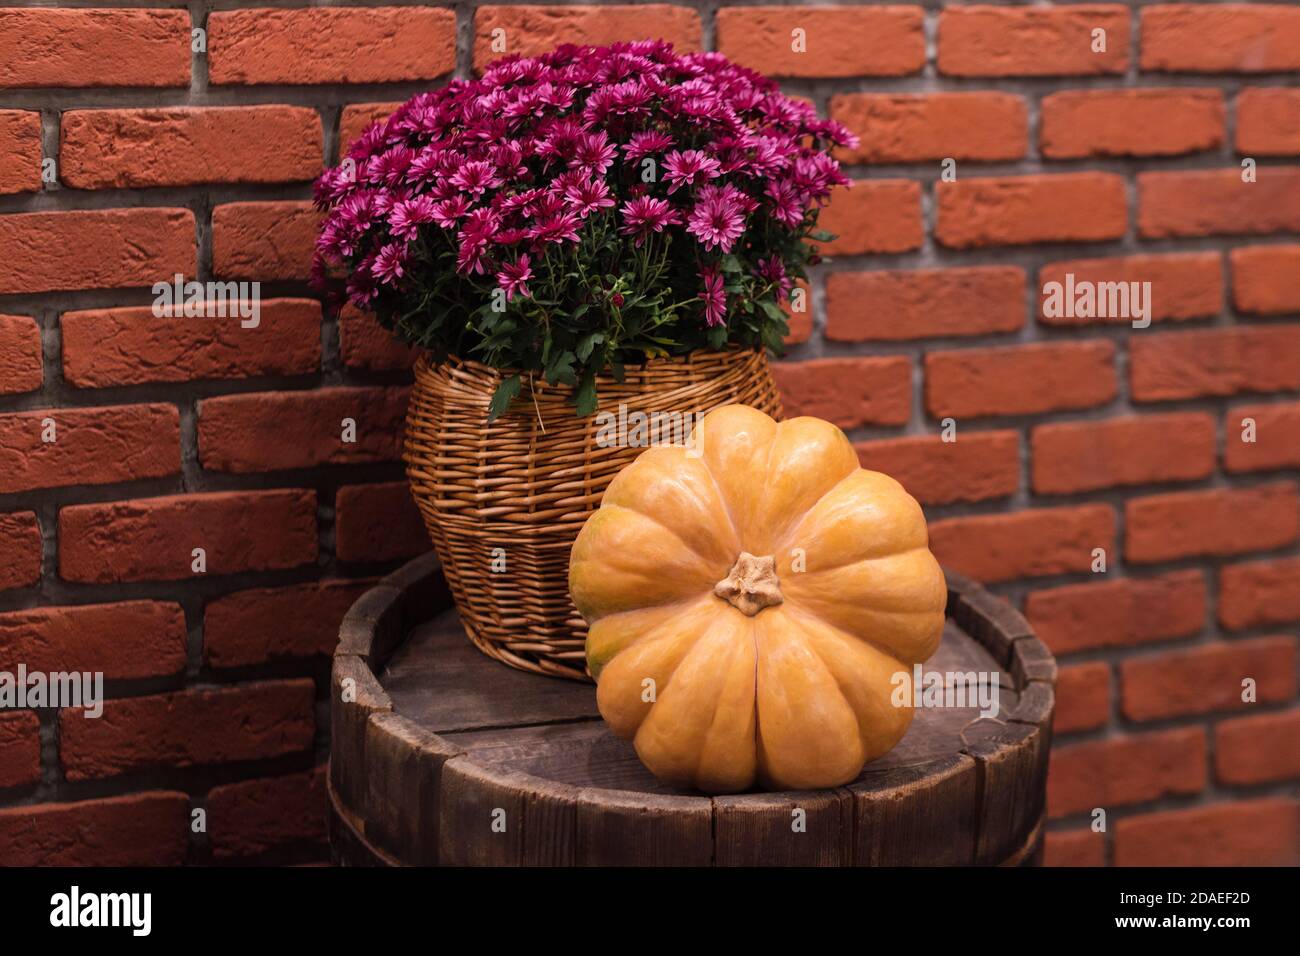 Autumn decor with pumpkin and flowers on old wooden barrel. Harvest and garden outdoor decorations for Halloween, Thanksgiving, autumn season still Stock Photo